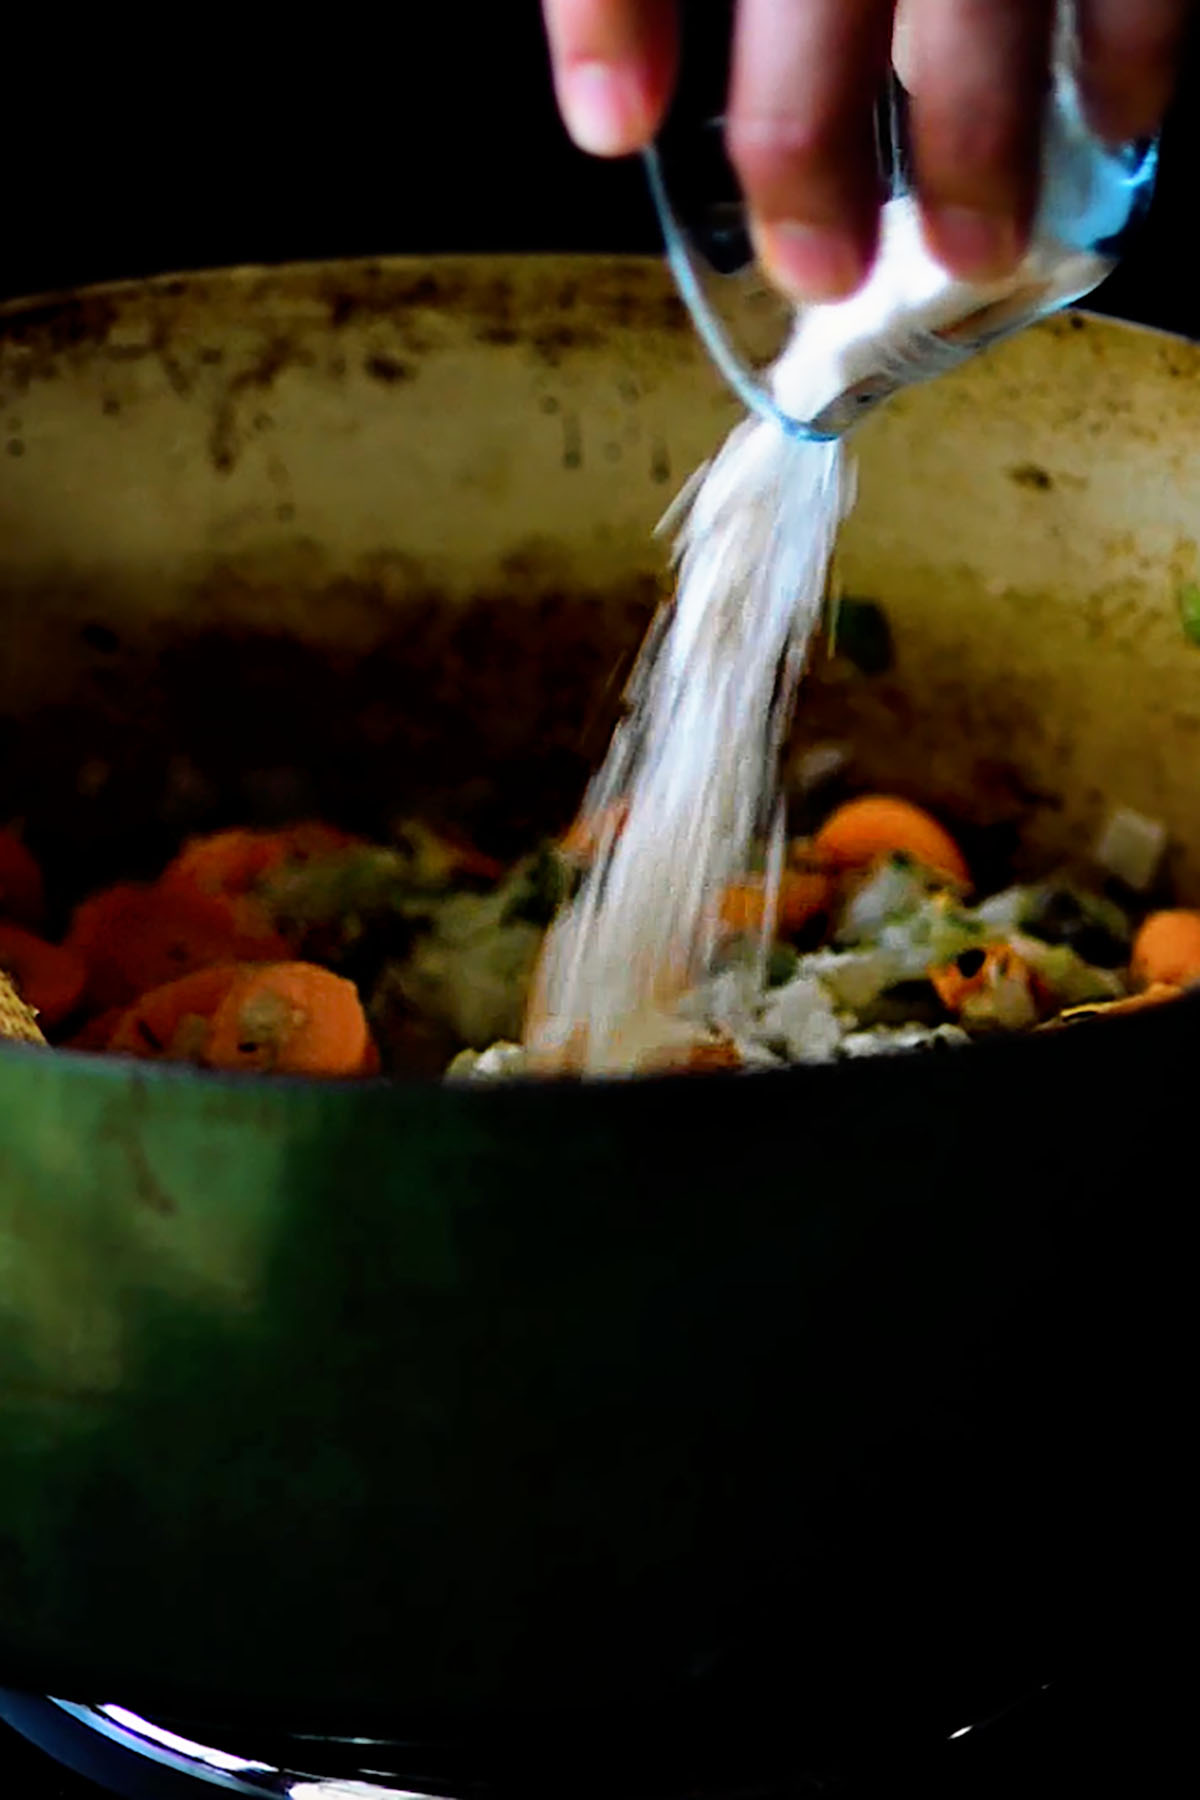 Flour being poured over sautéd vegetables in a dutch oven.